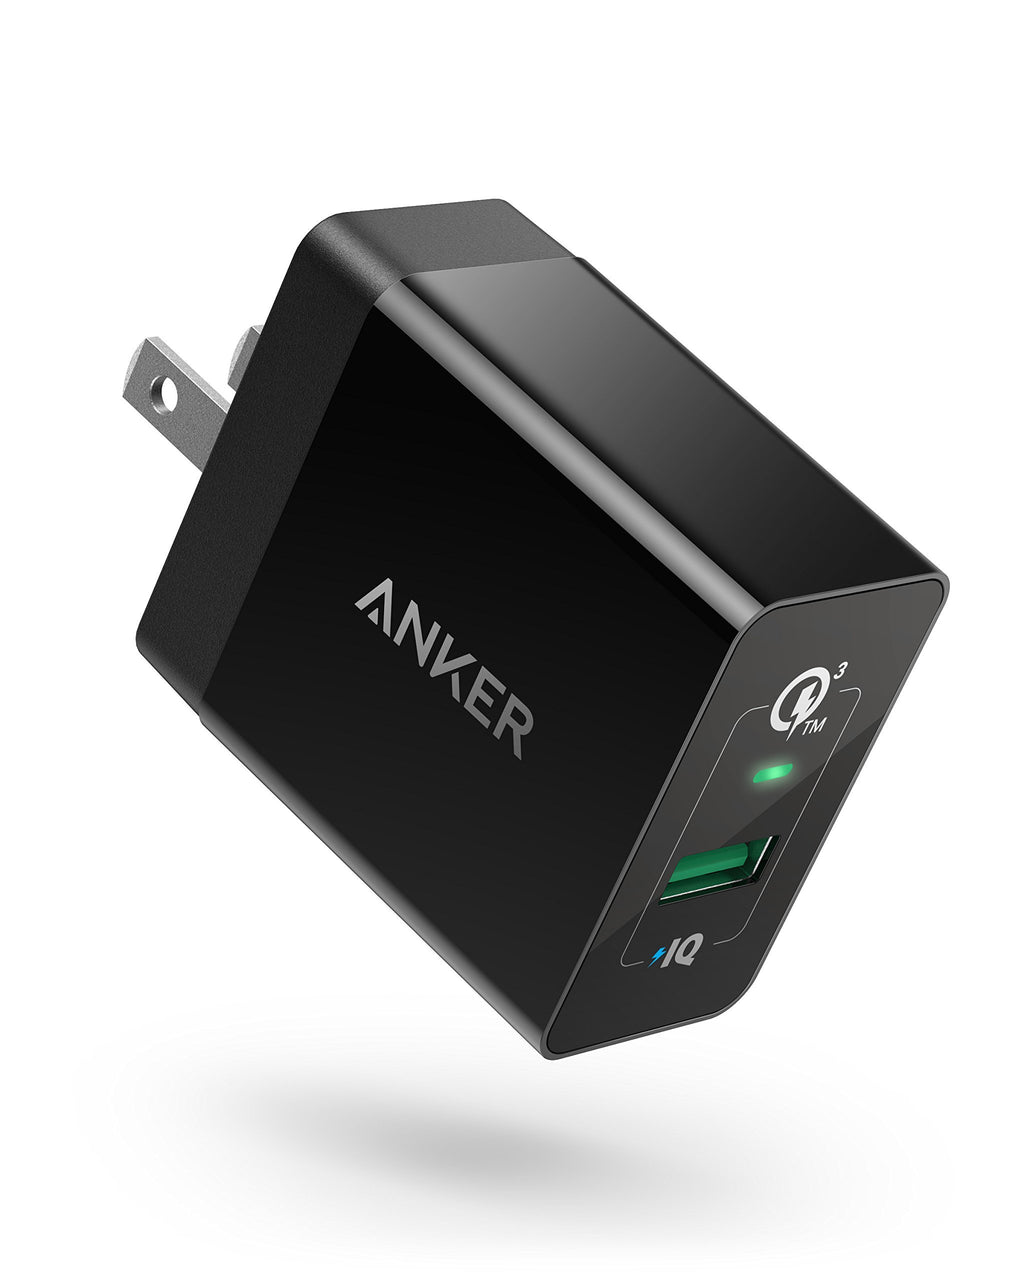 Quick Charge 3.0, Anker 18W 3Amp USB Wall Charger (Quick Charge 2.0 Compatible) Powerport+ 1 for Anker Wireless Charger, Galaxy S10e/S10/S9/S8/Plus, Note 9/8, LG V40/V30+, iPhone, iPad and More Black